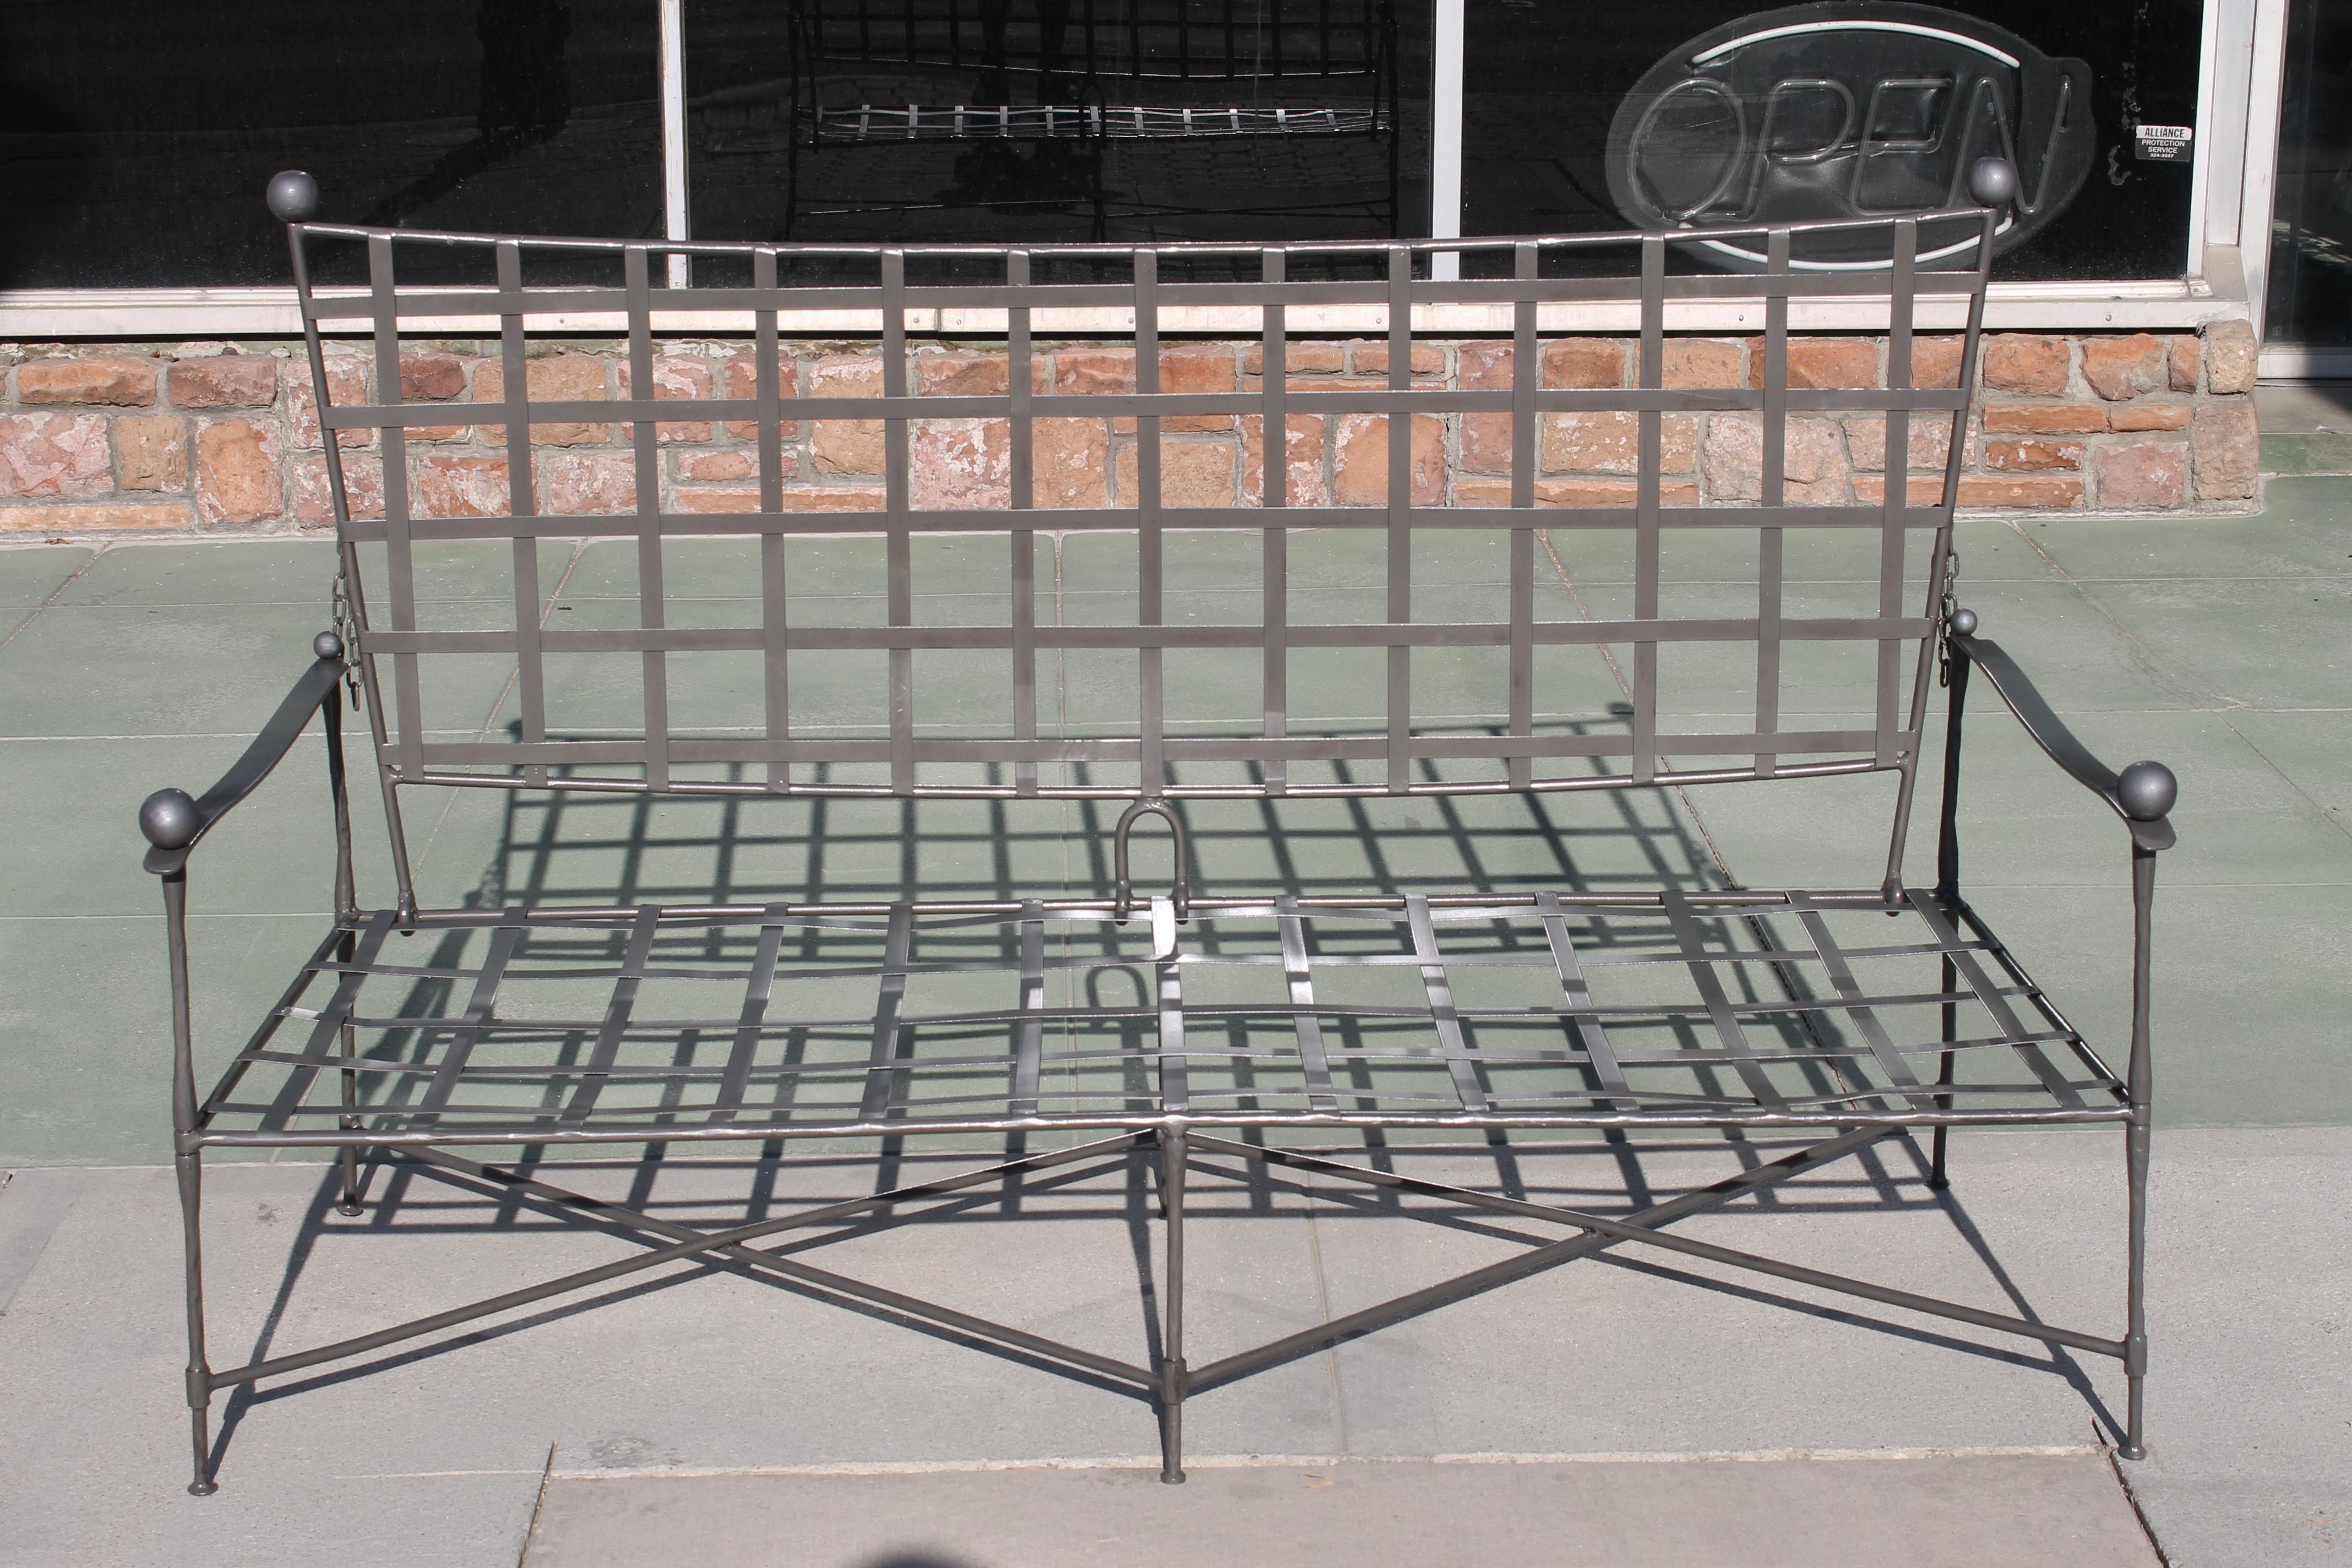 Pair of settees by Mario Papperzini for John Salterini. They have been professionally sand blasted and powder coated. Color is a rust grey. The back portions are not adjustable but, modifying the chain link could make them adjustable. If so, the